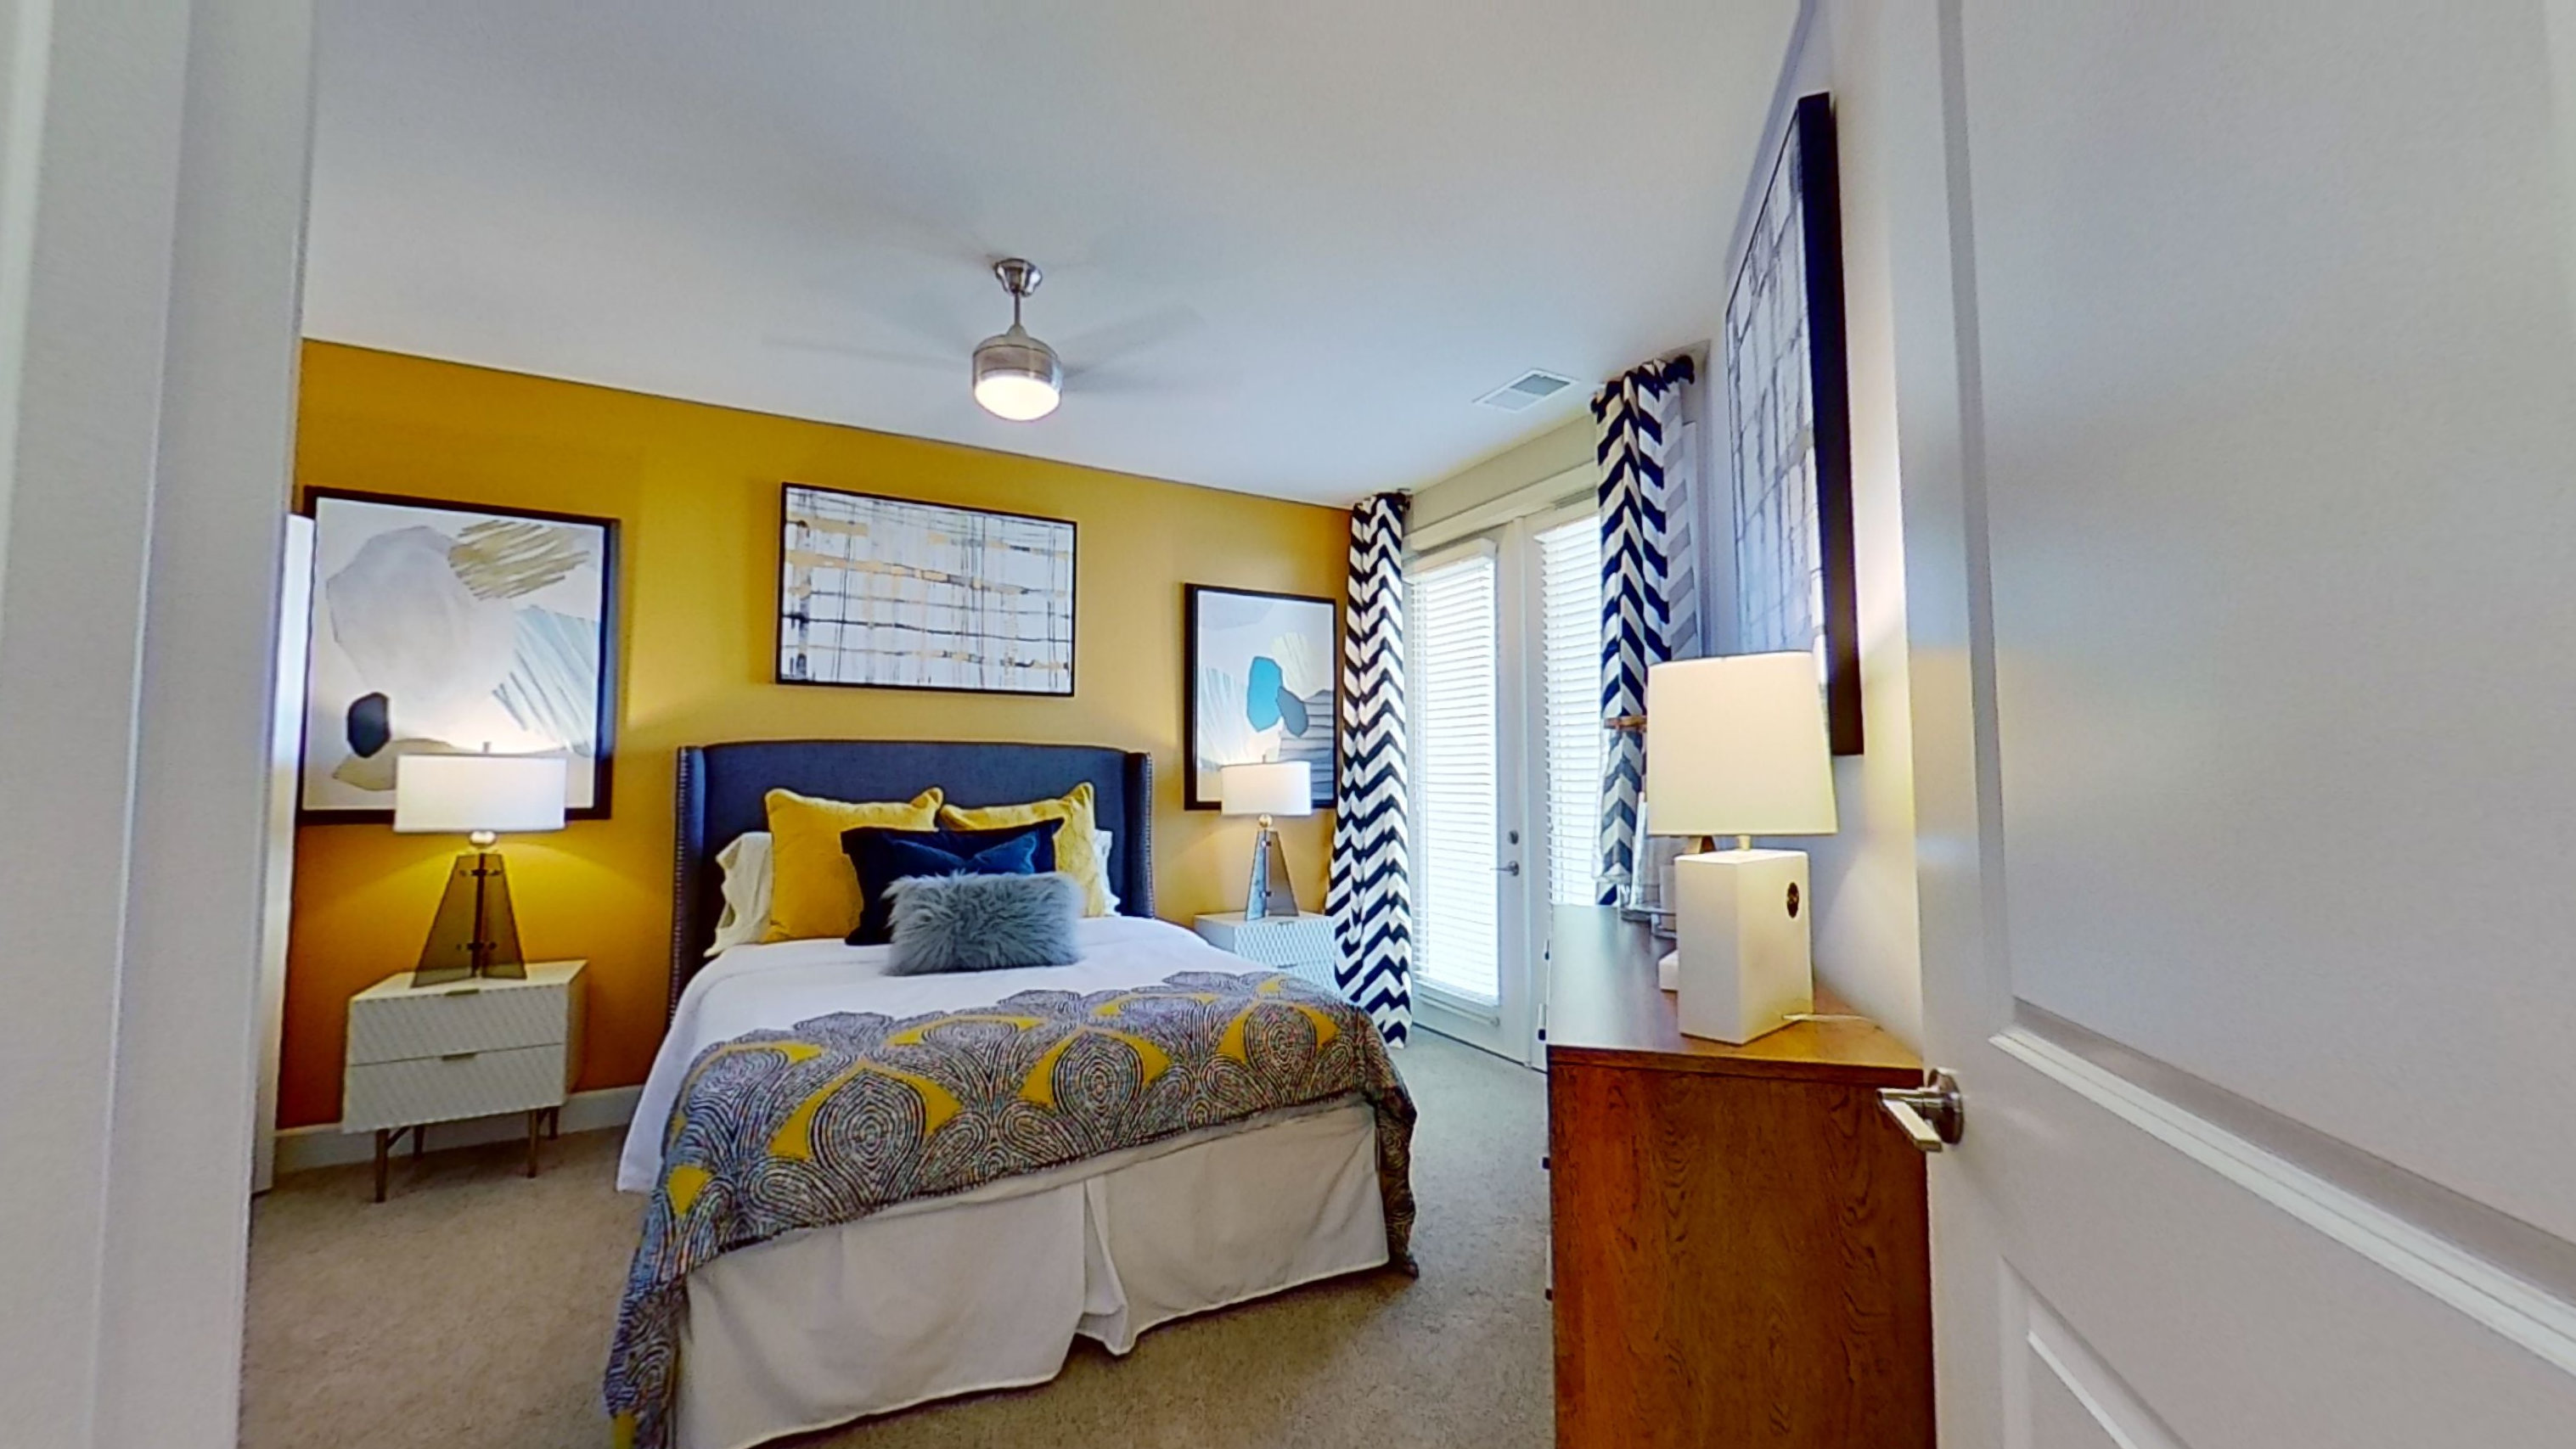 A3 Unit Bedroom at the Vue at Creve Coeur Apartments in Creve Coeur, MO